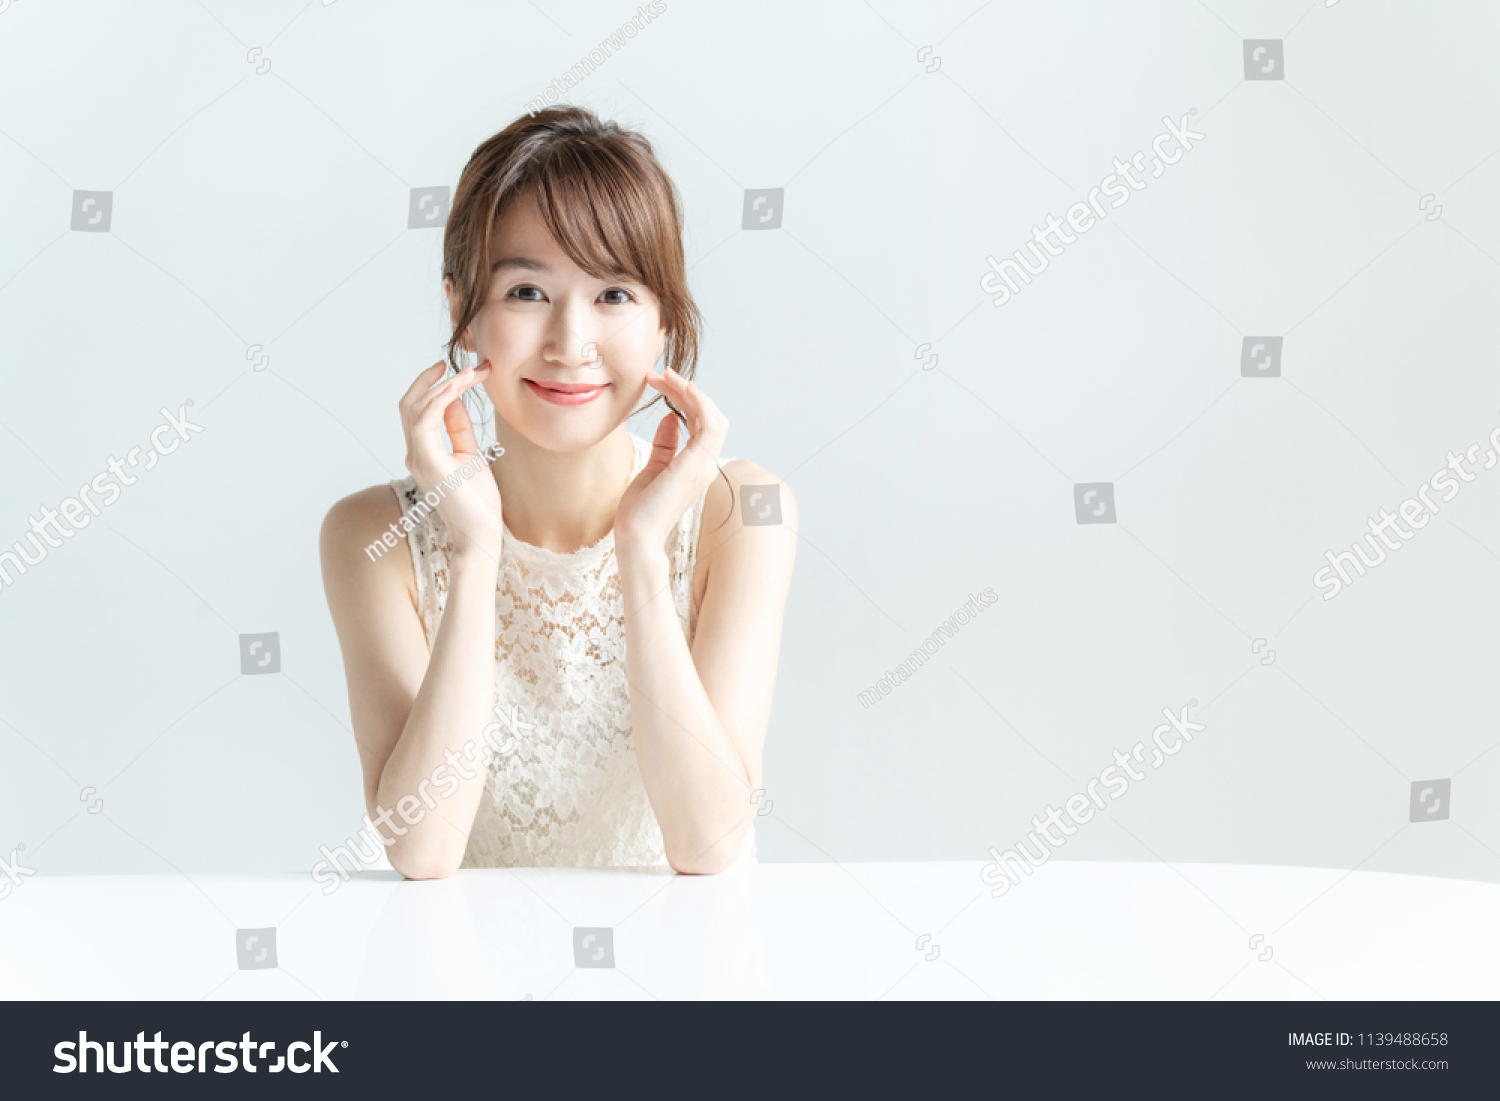 Beauty concept of asian girl. #1139488658